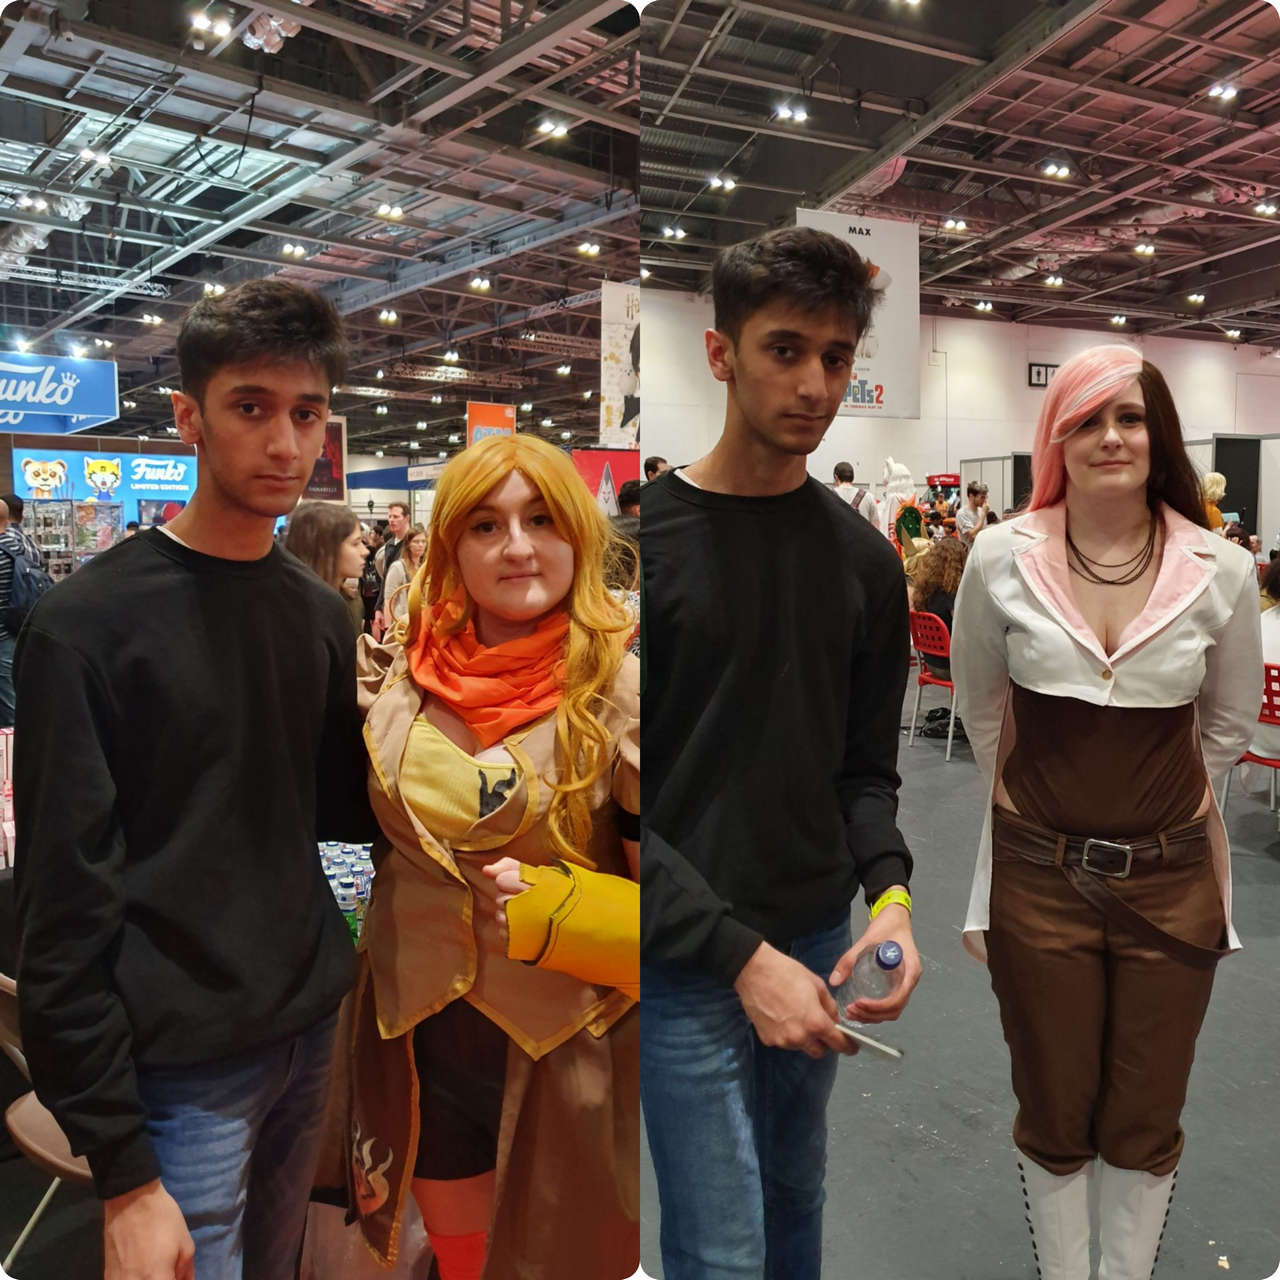 Found Some Amazing Cosplays Yesterday At Mc